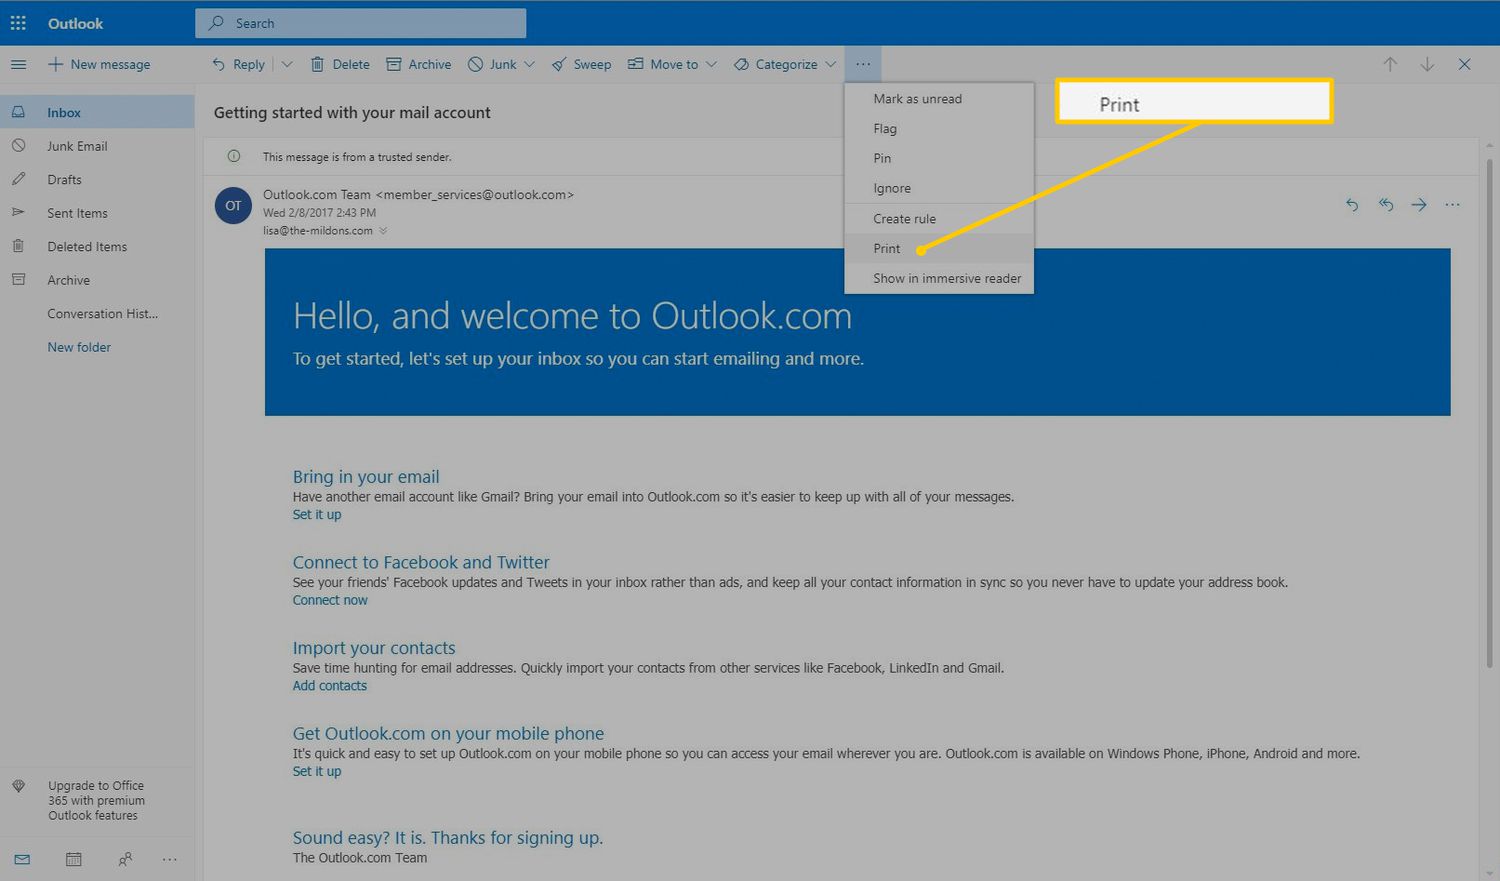 How to Print From Outlook?